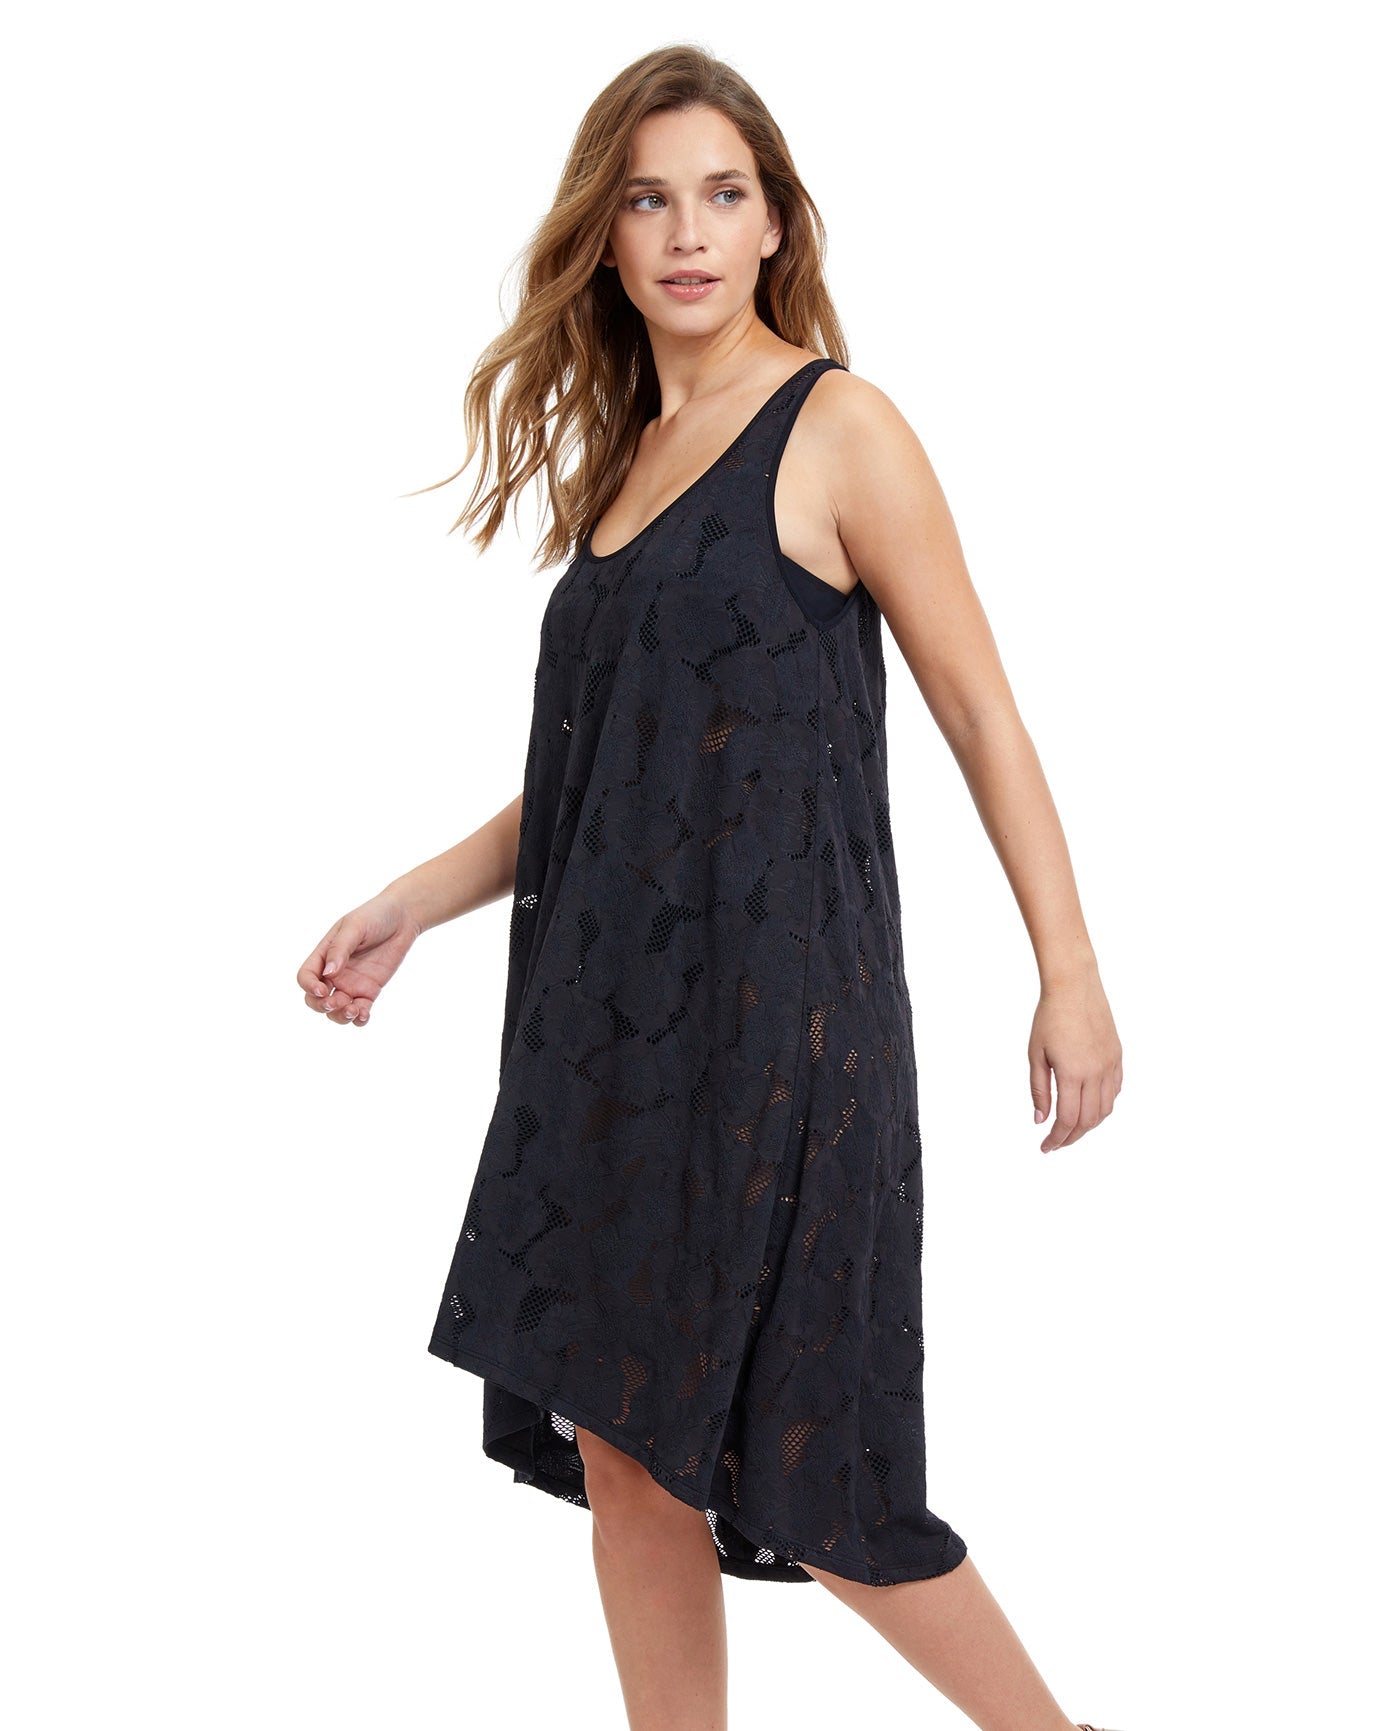 Side View Of Profile By Gottex Late Bloomer High Low Mesh Beach Dress Cover Up | PROFILE LATE BLOOMER BLACK